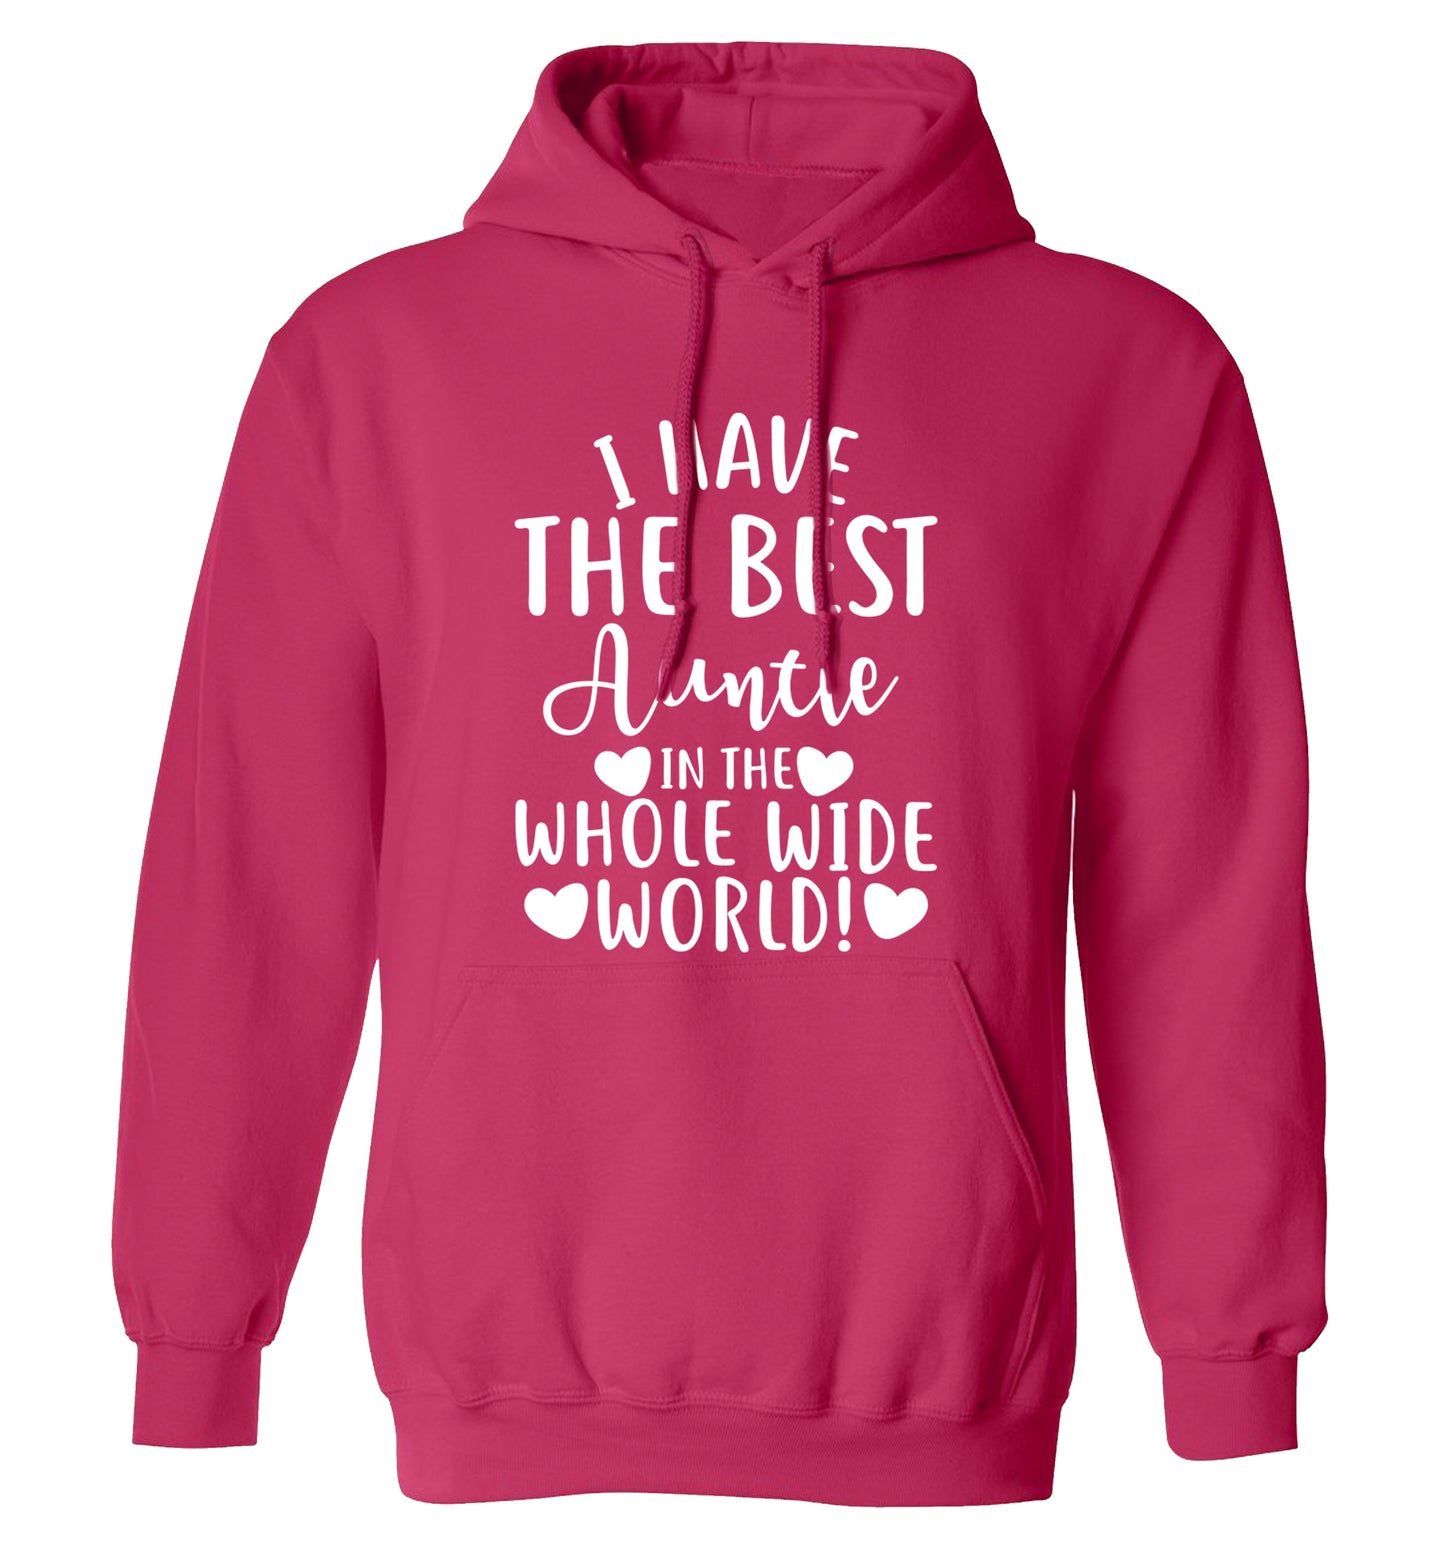 I have the best auntie in the whole wide world! adults unisex pink hoodie 2XL